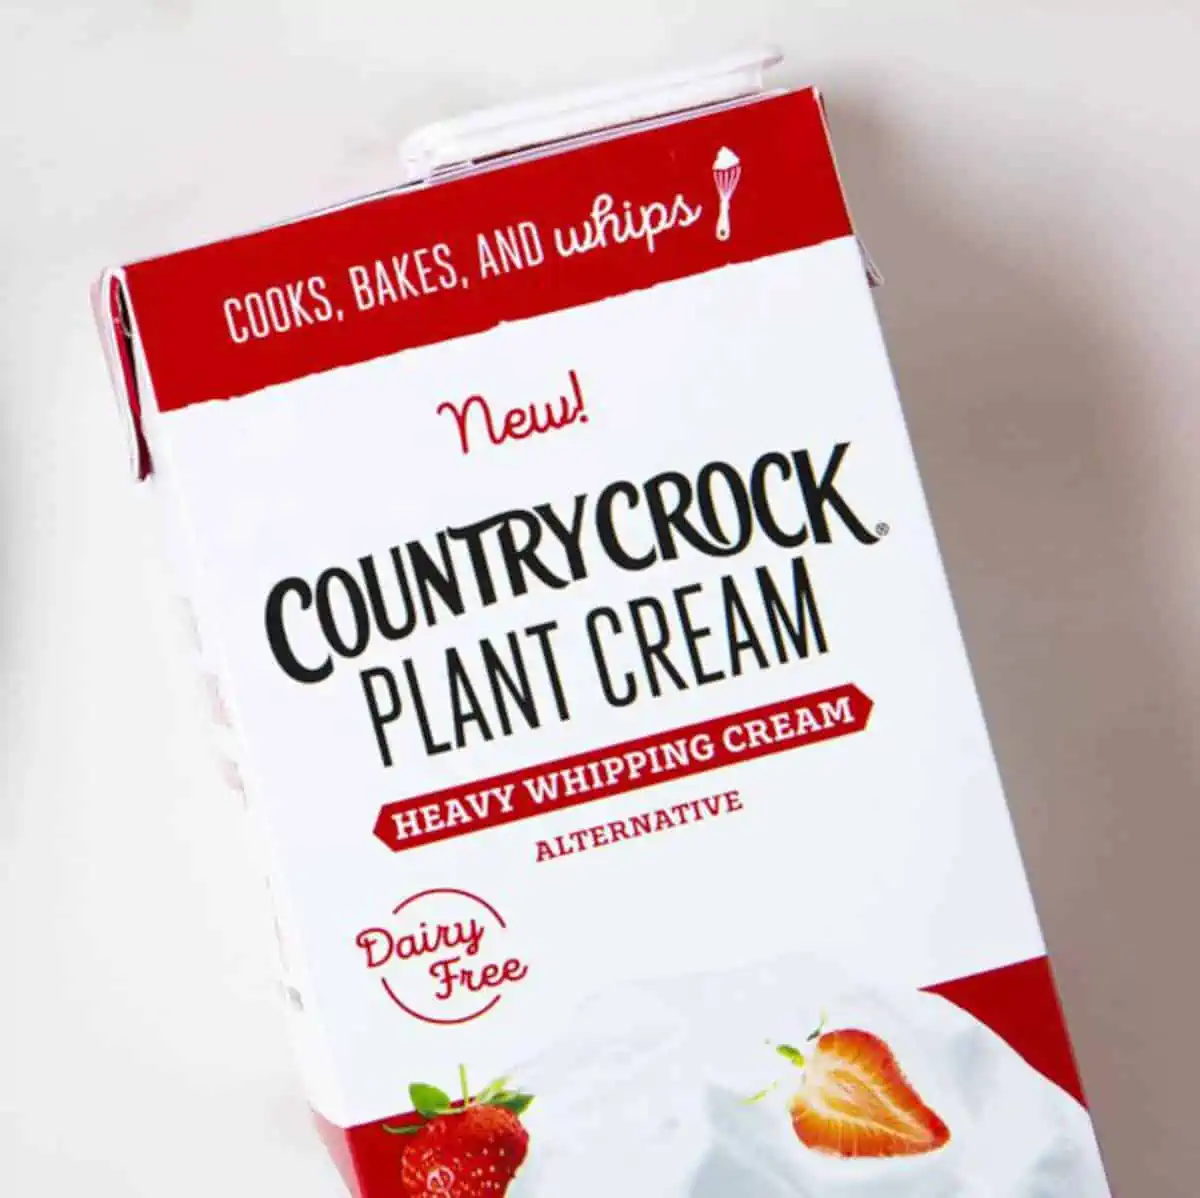 A carton of Country Crock Plant Cream on a light background.